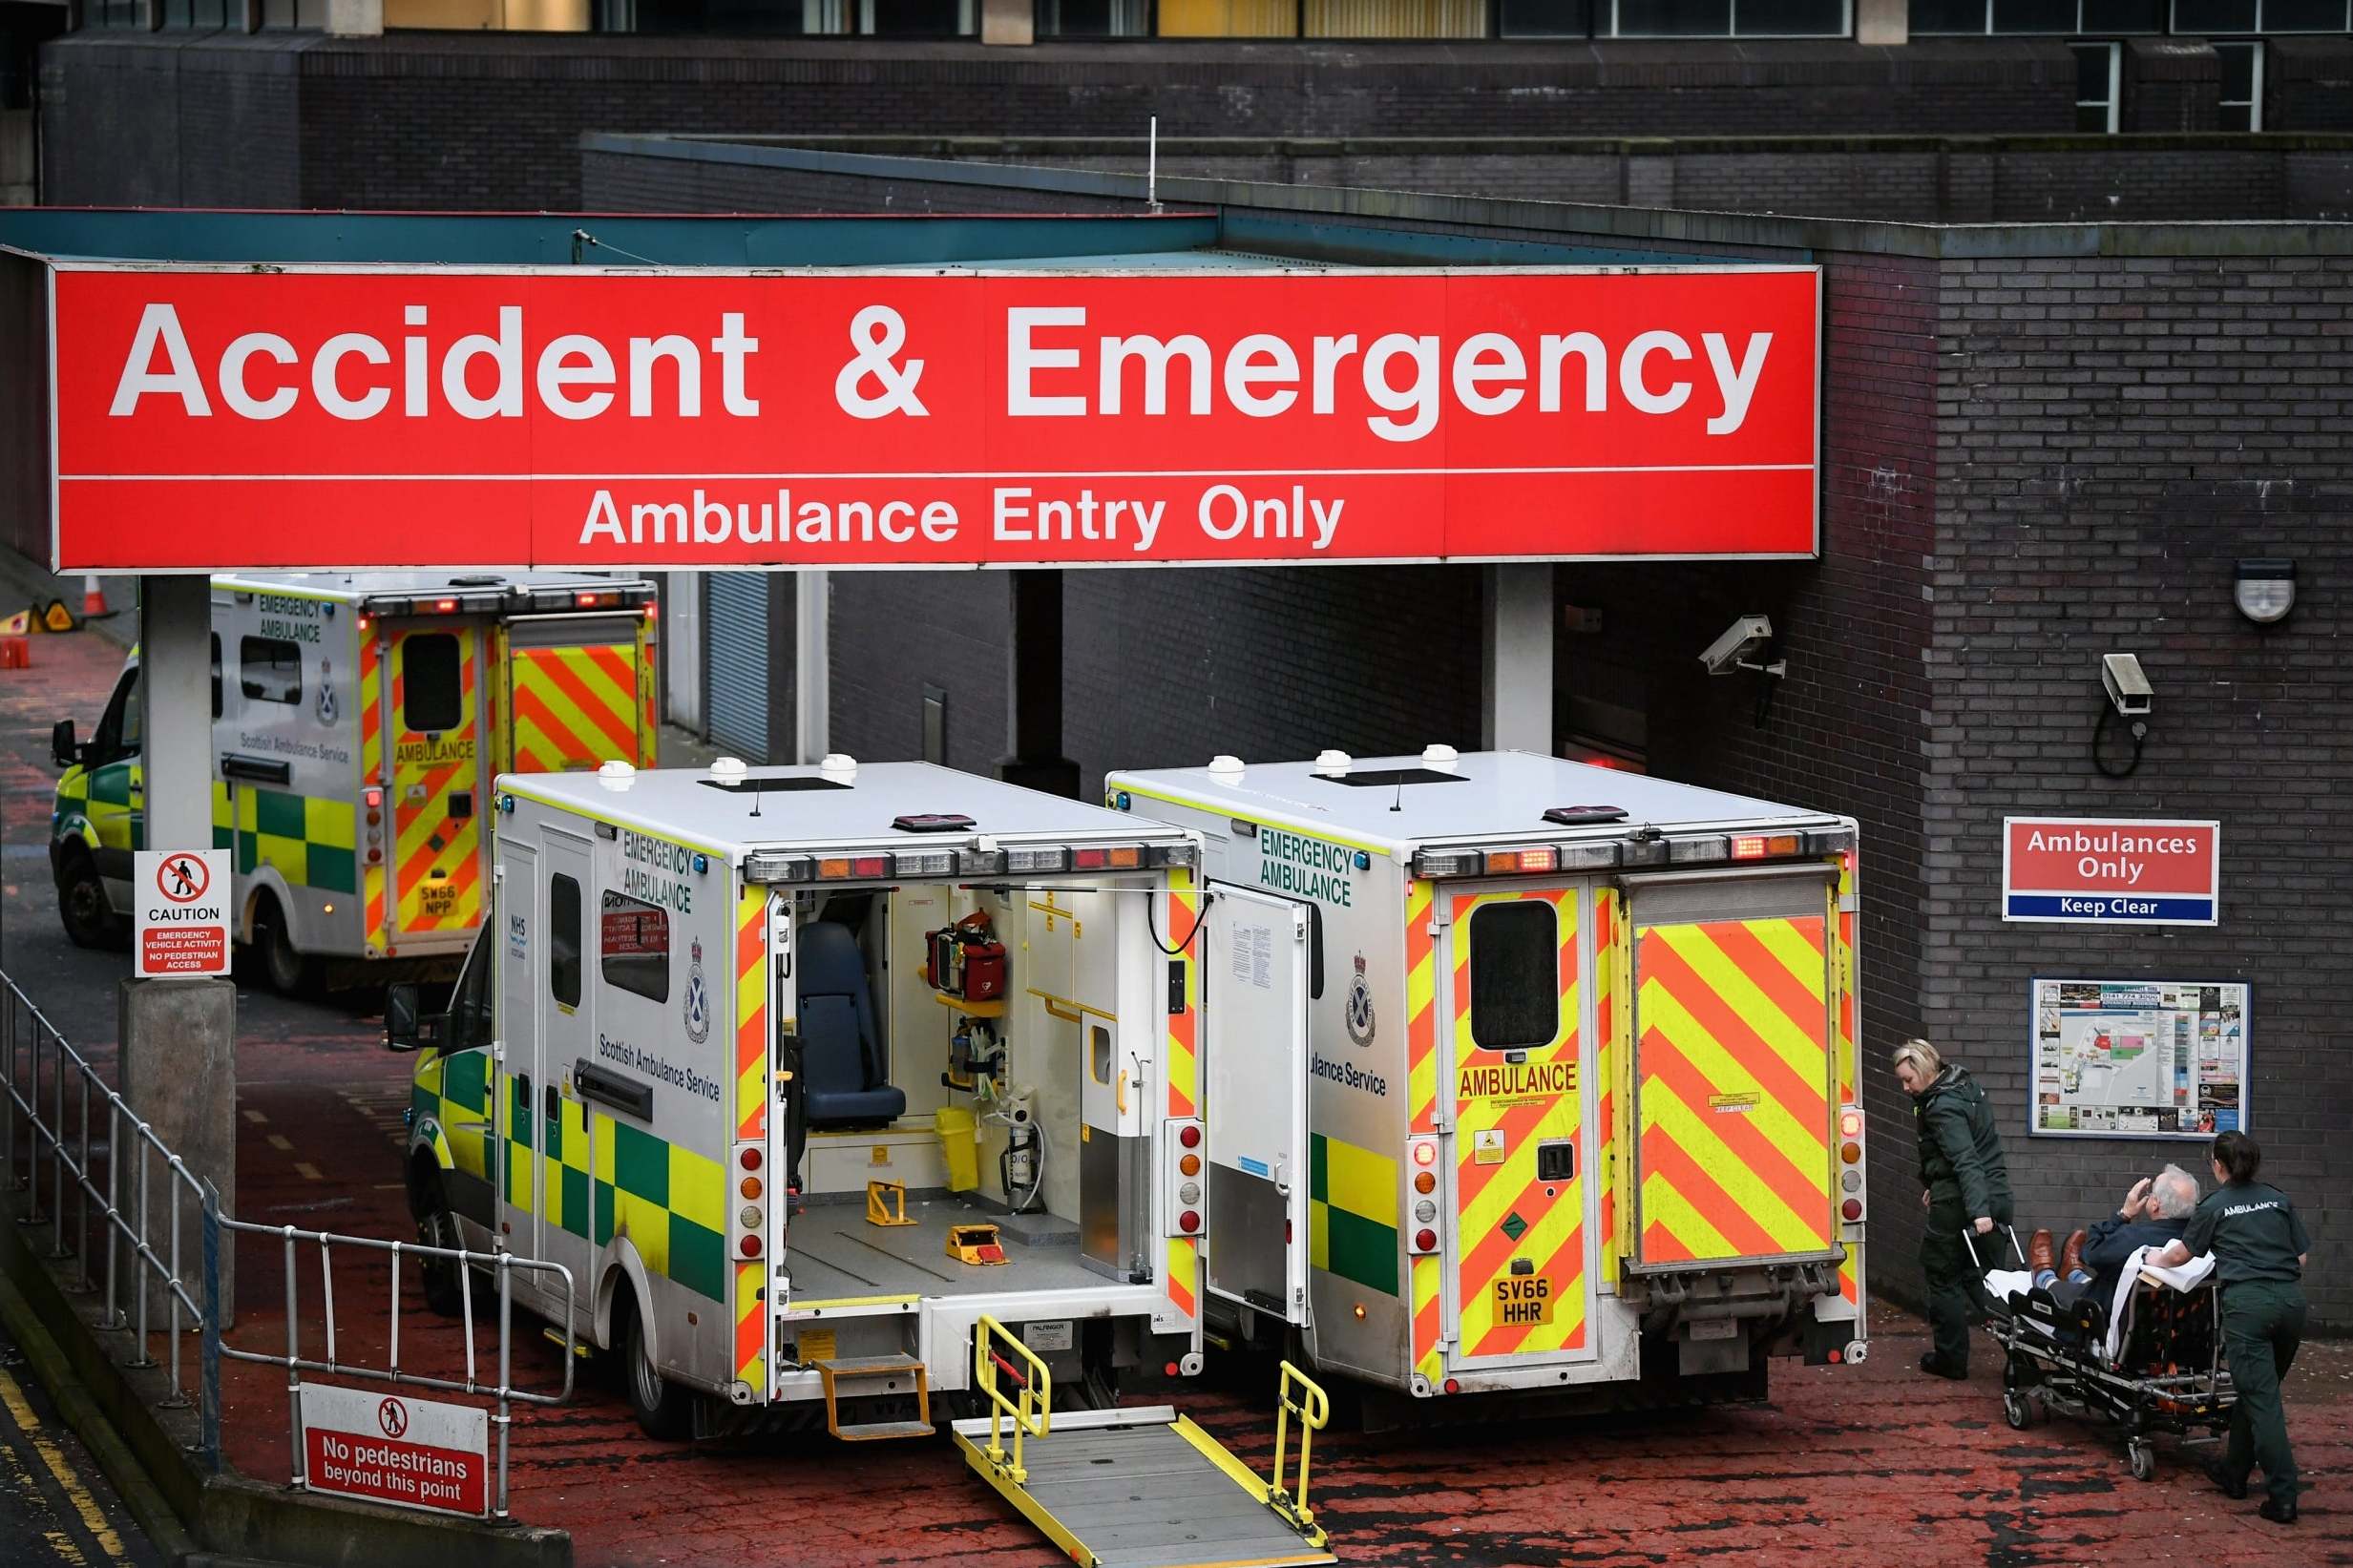 Emergency services are under ‘acute pressure’ amid a surge in Covid-19 cases (picture shows ambulances at Glasgow Royal Hospital)